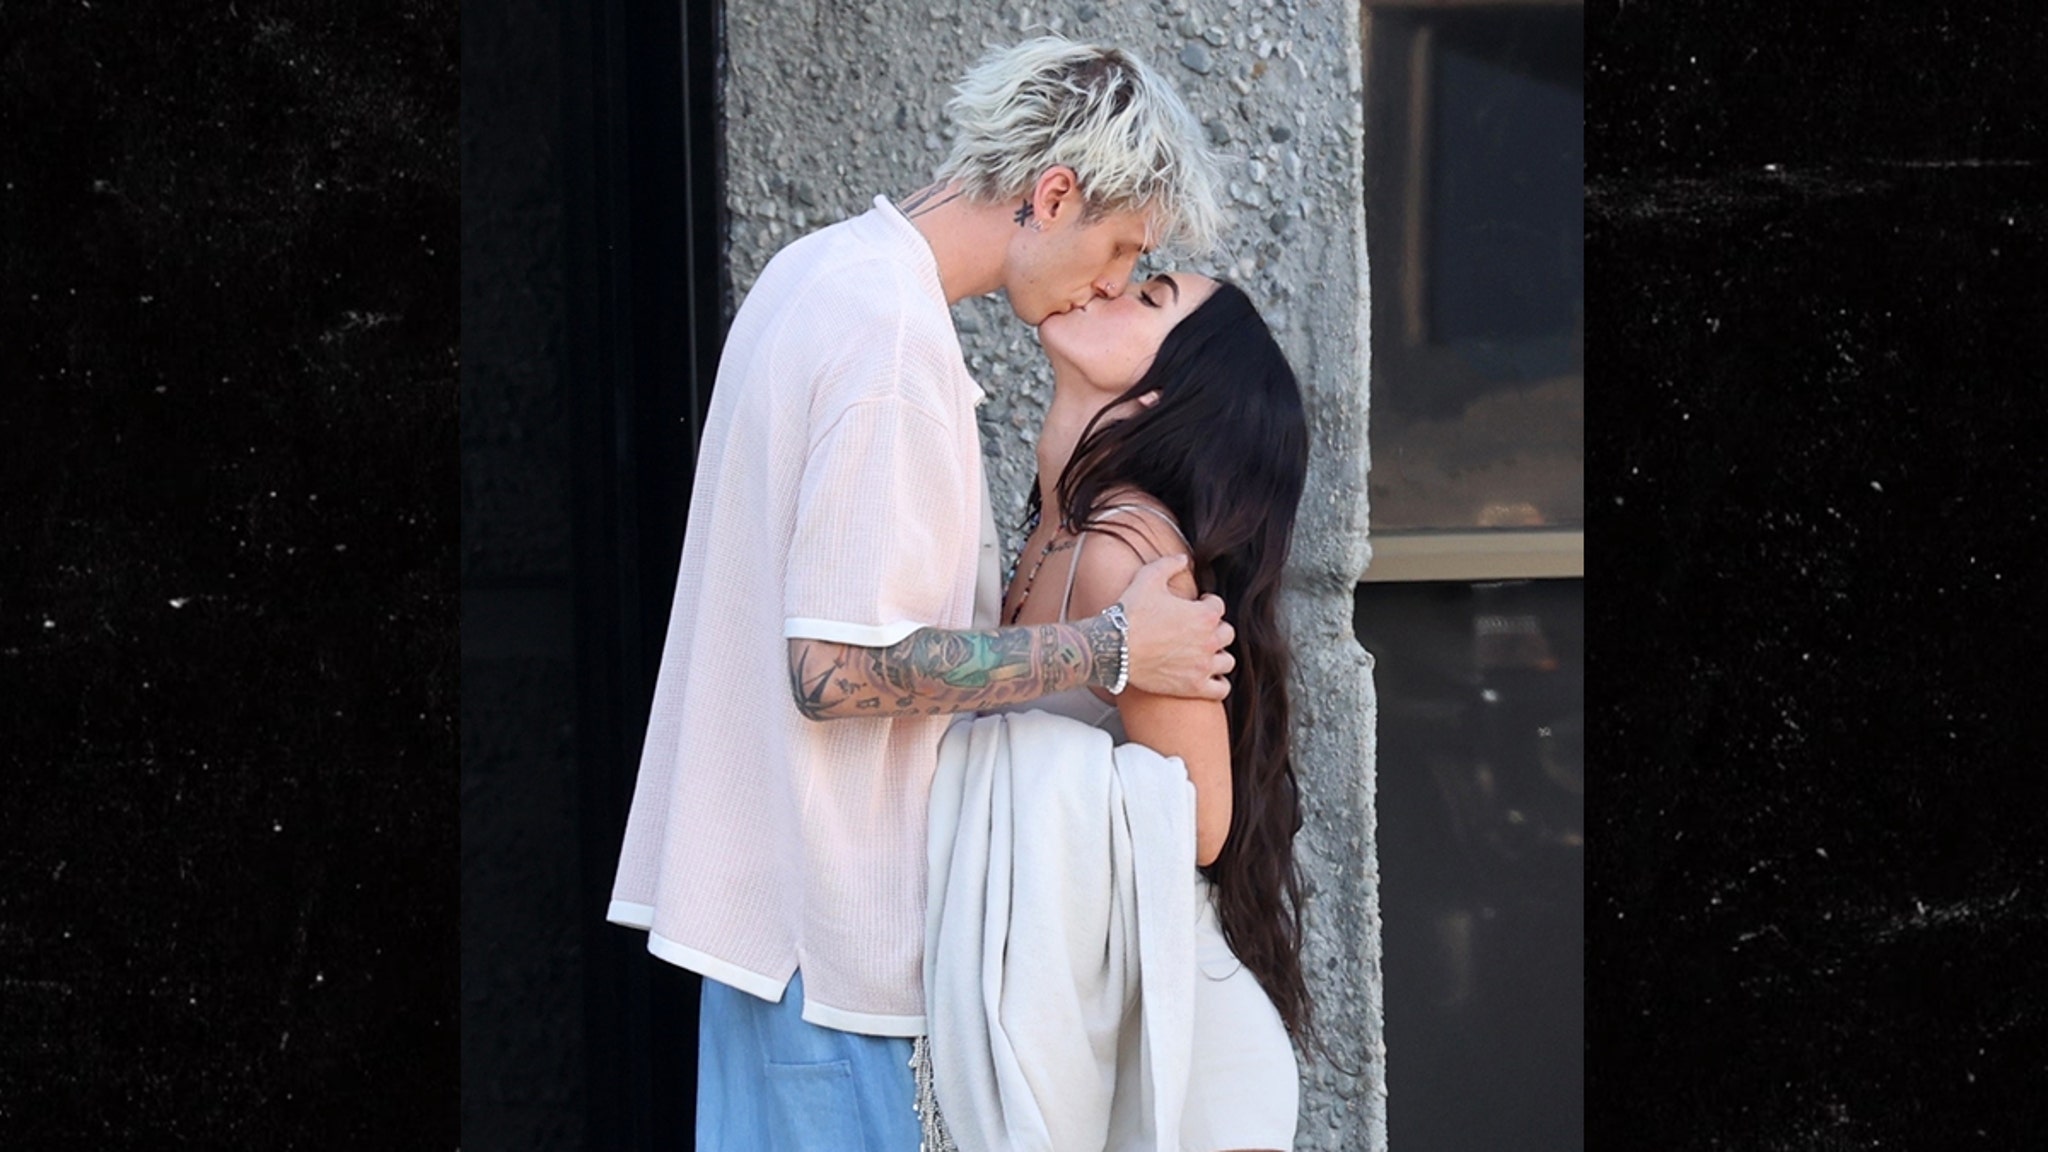 Machine Gun Kelly and Megan Fox Make Out After Cops Pull Them Over